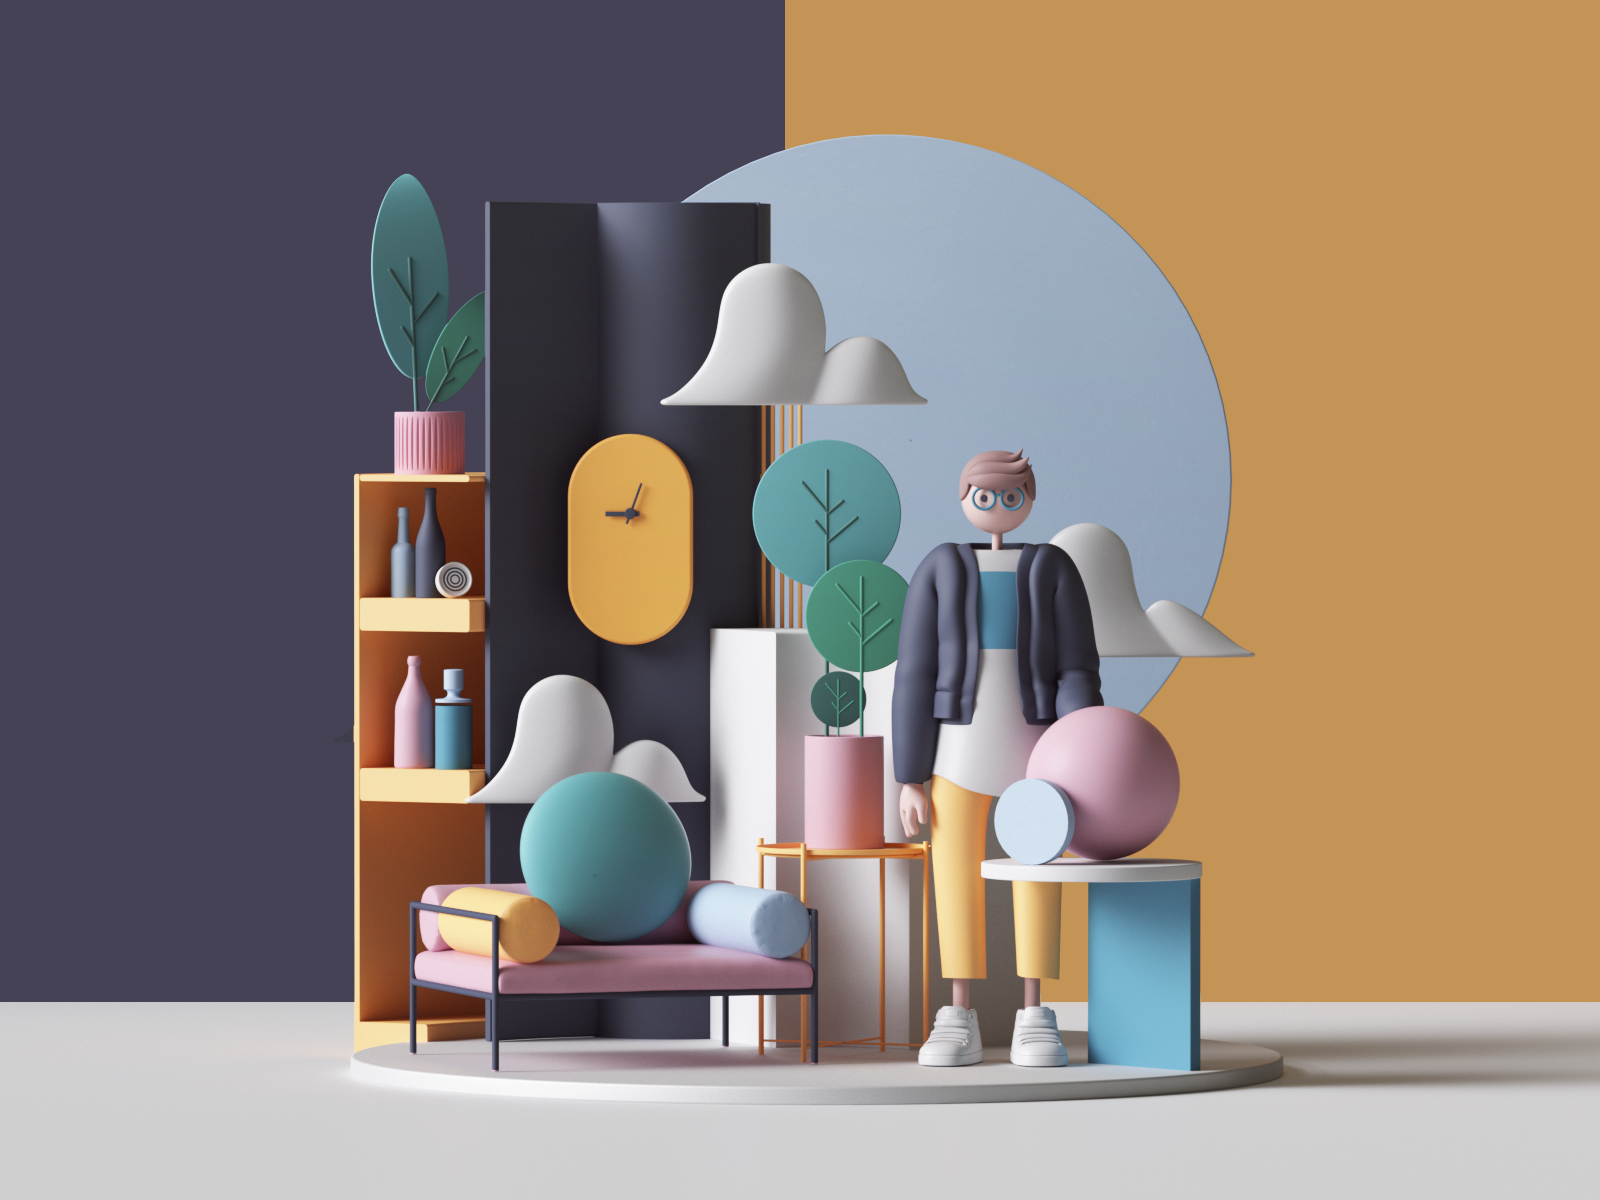 A collection of design inspiration titled c4d by xiebo.